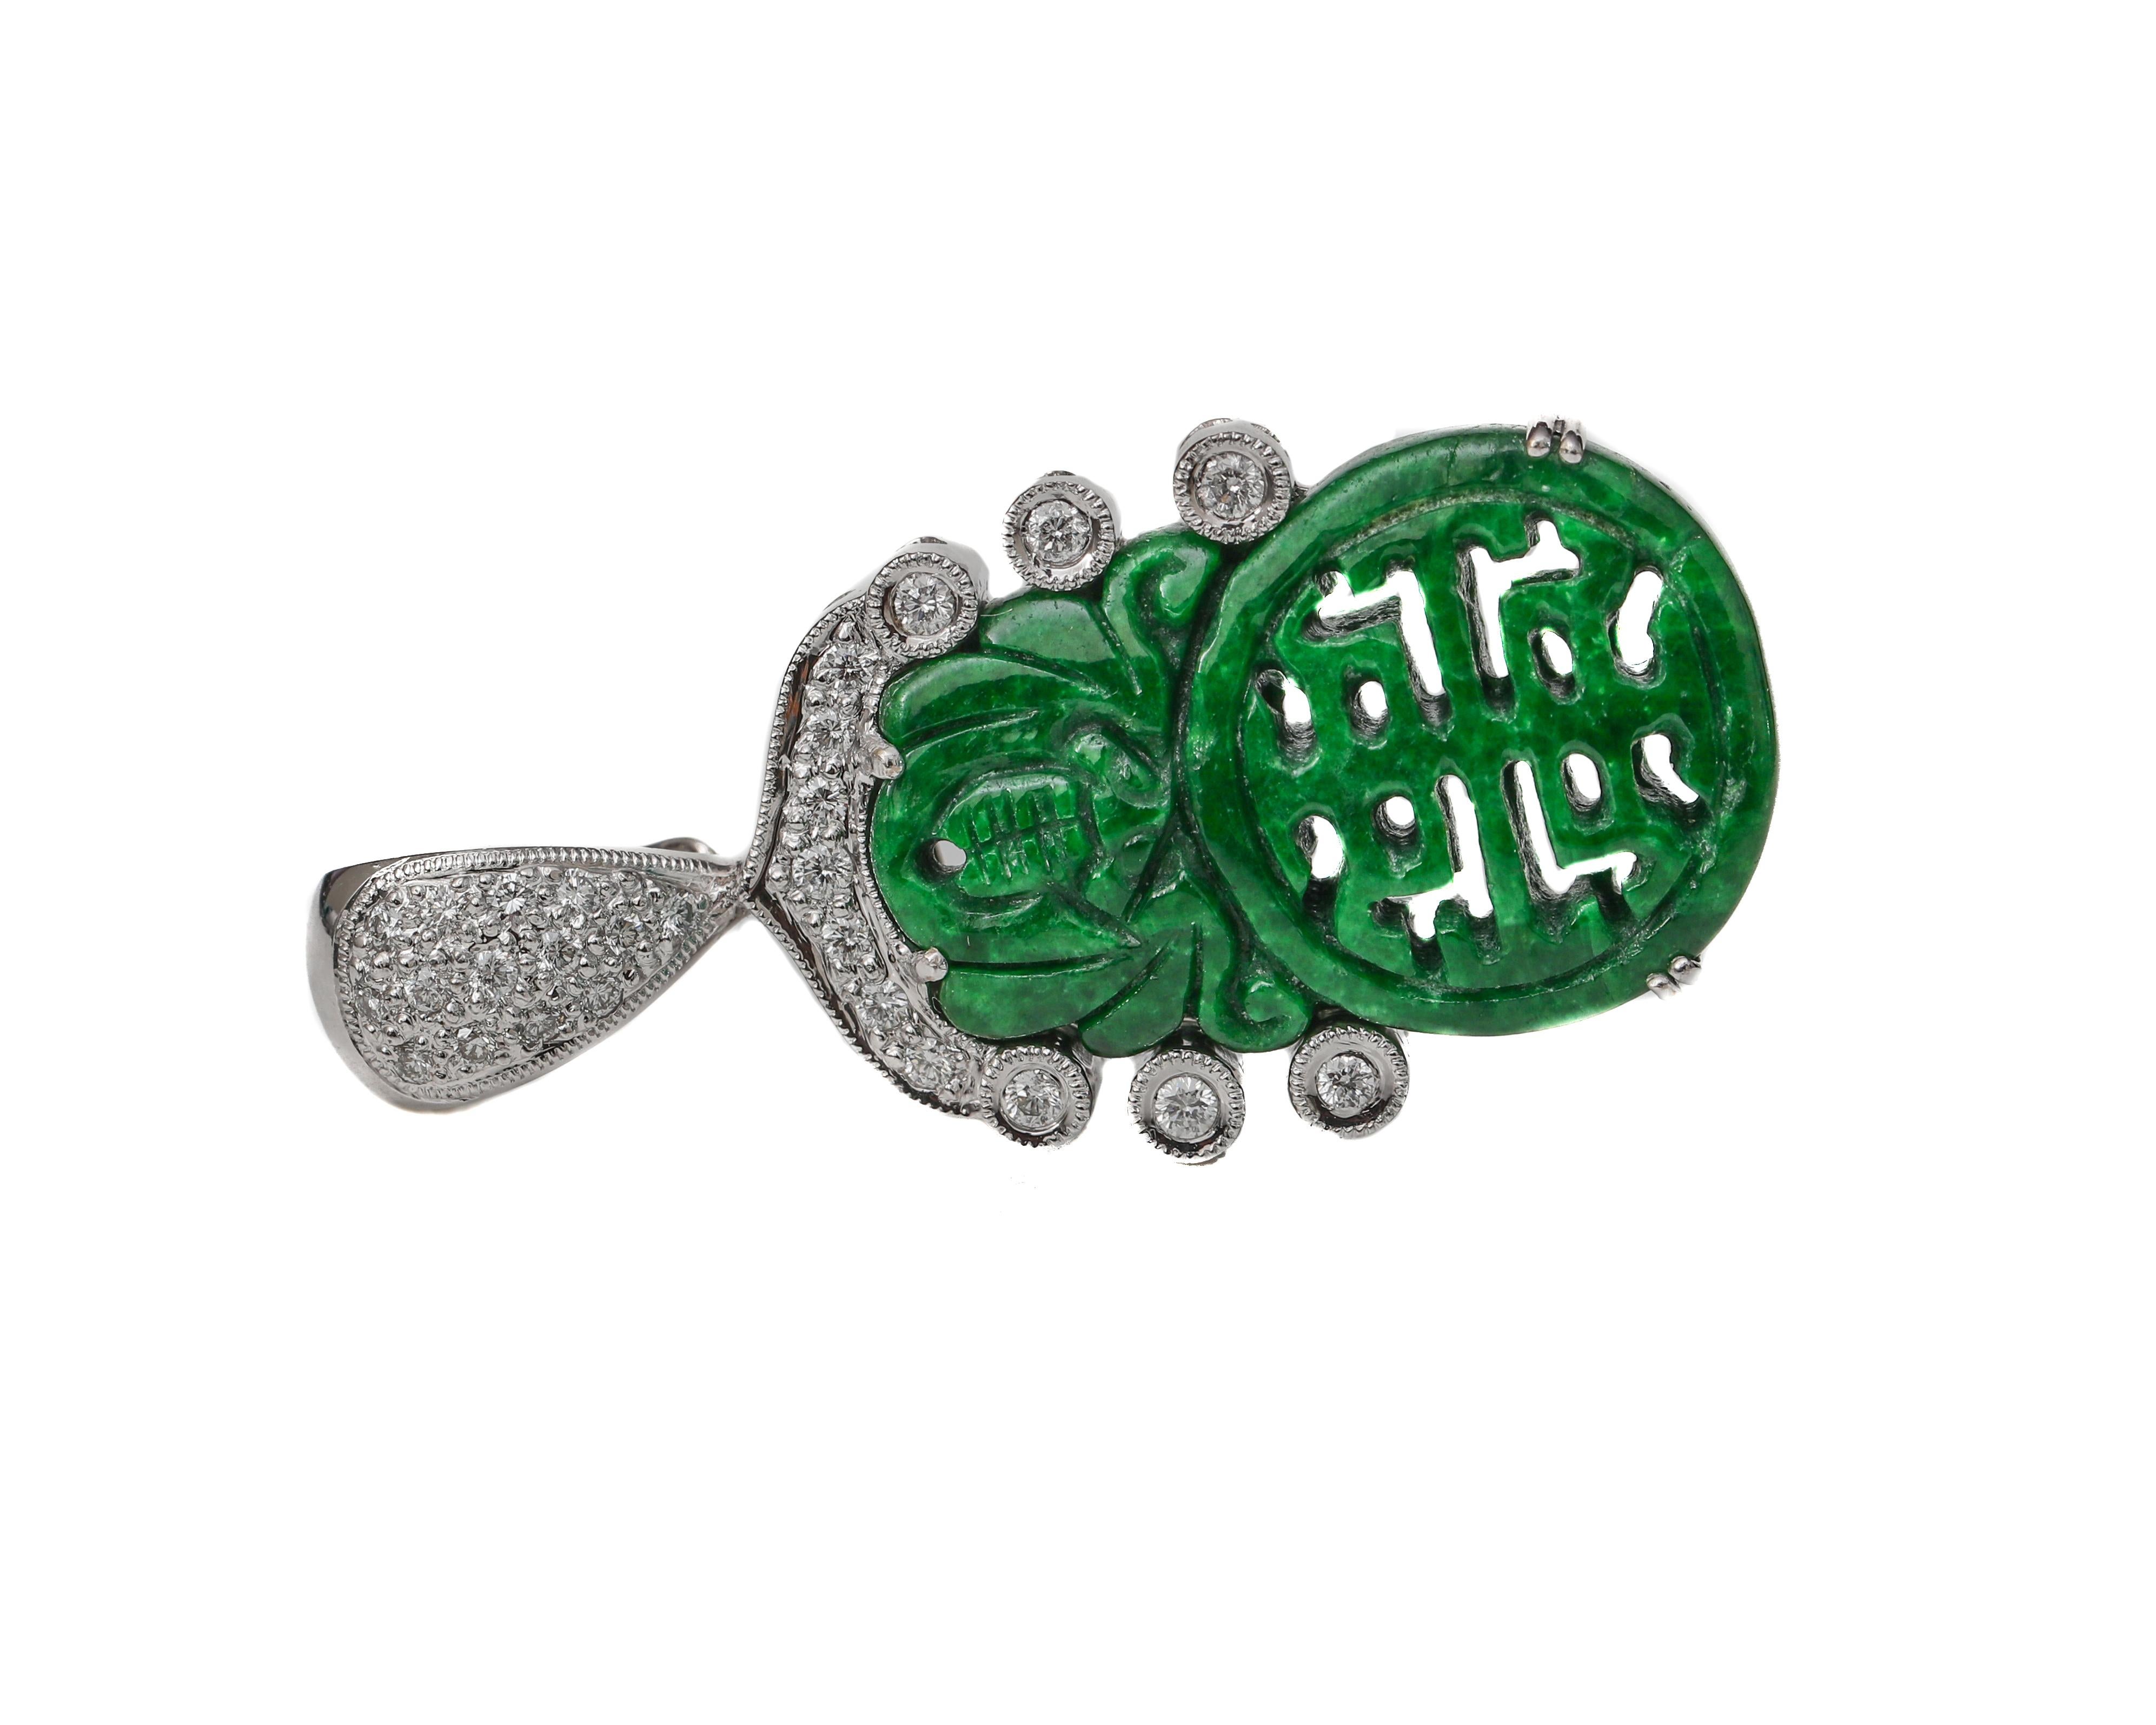 Beautiful 18 karat white gold Scarab Jade pendant with half a carat of diamonds that sparkle and dazzle from afar!

Pendant details:
Metal: 18 karat white gold 
Weight: 11.53 grams
Measurements: 40 millimeter x 20 millimeter 

Diamond Details:
Cut: